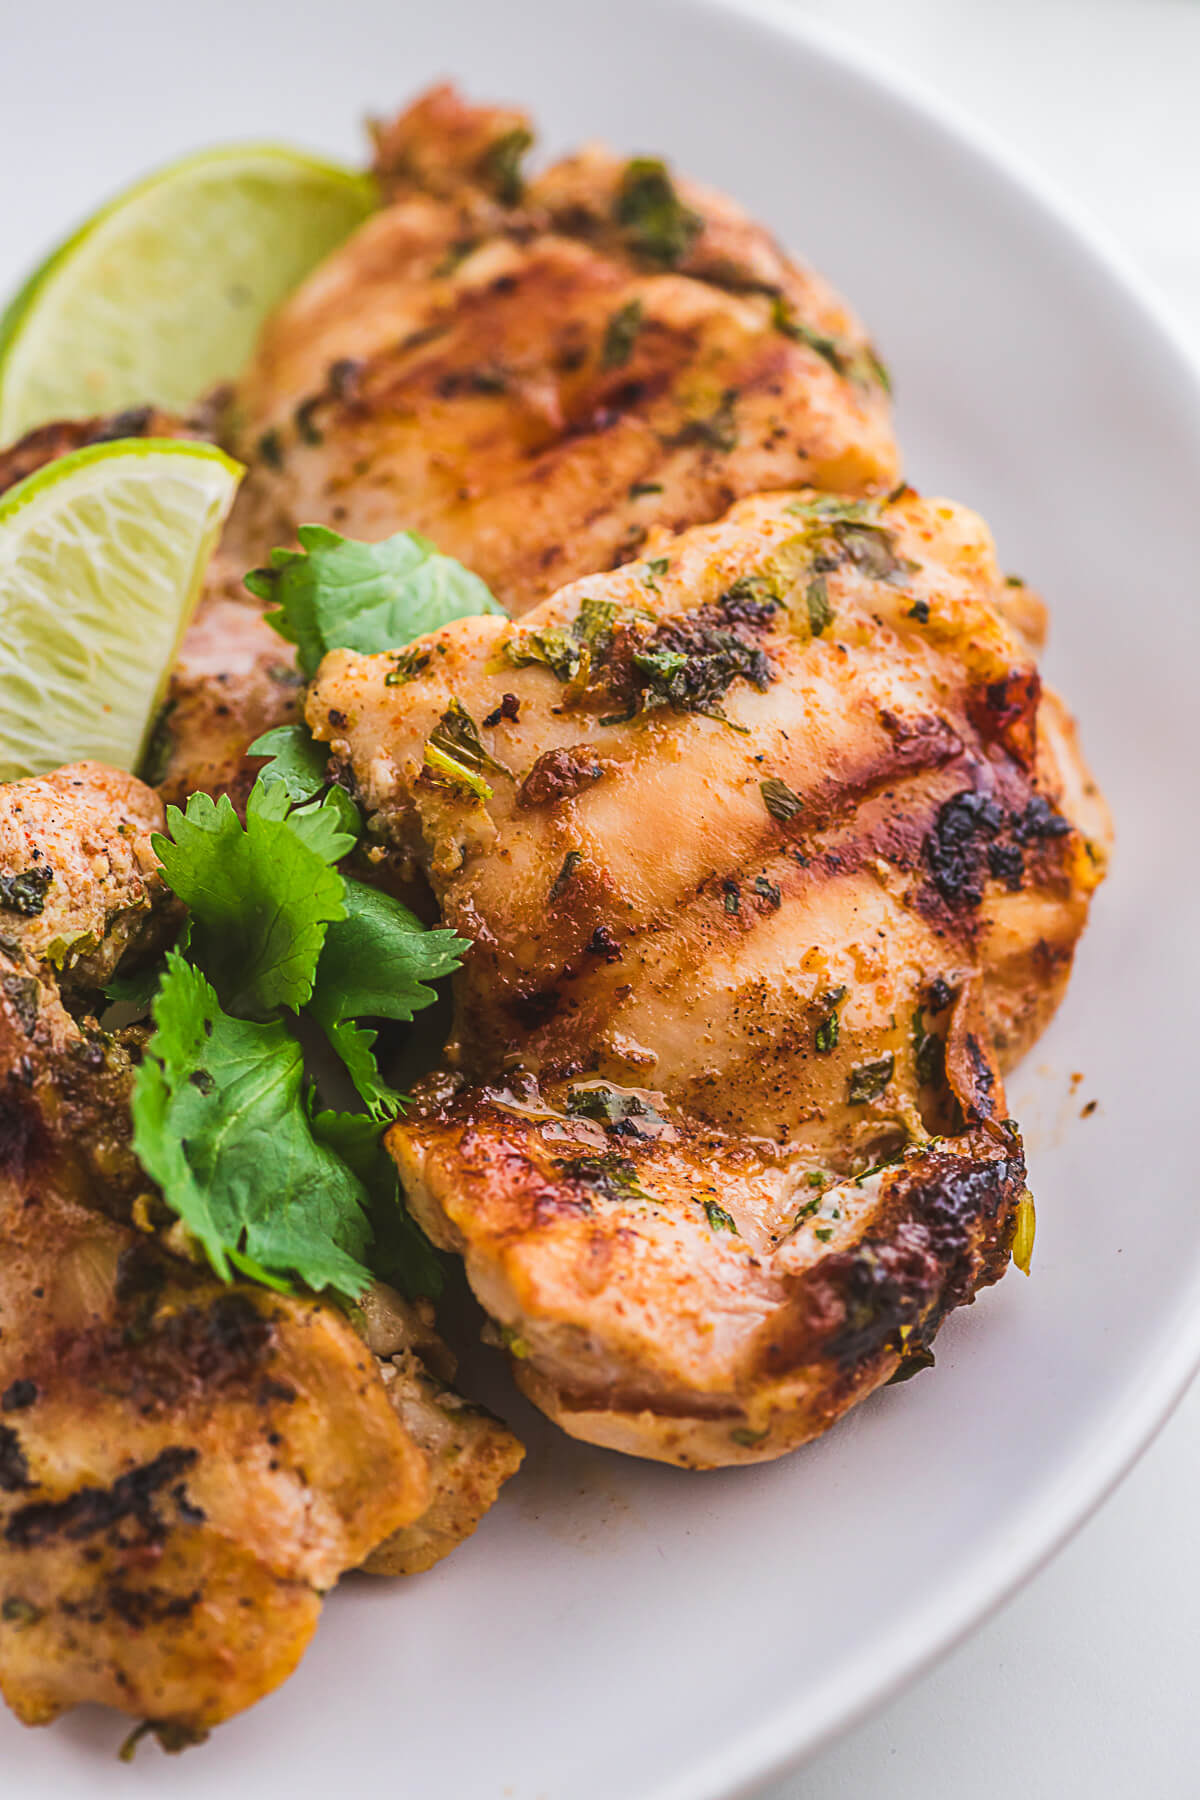 A plate of grilled chicken thighs garnished with cilantro and served with lime wedges.